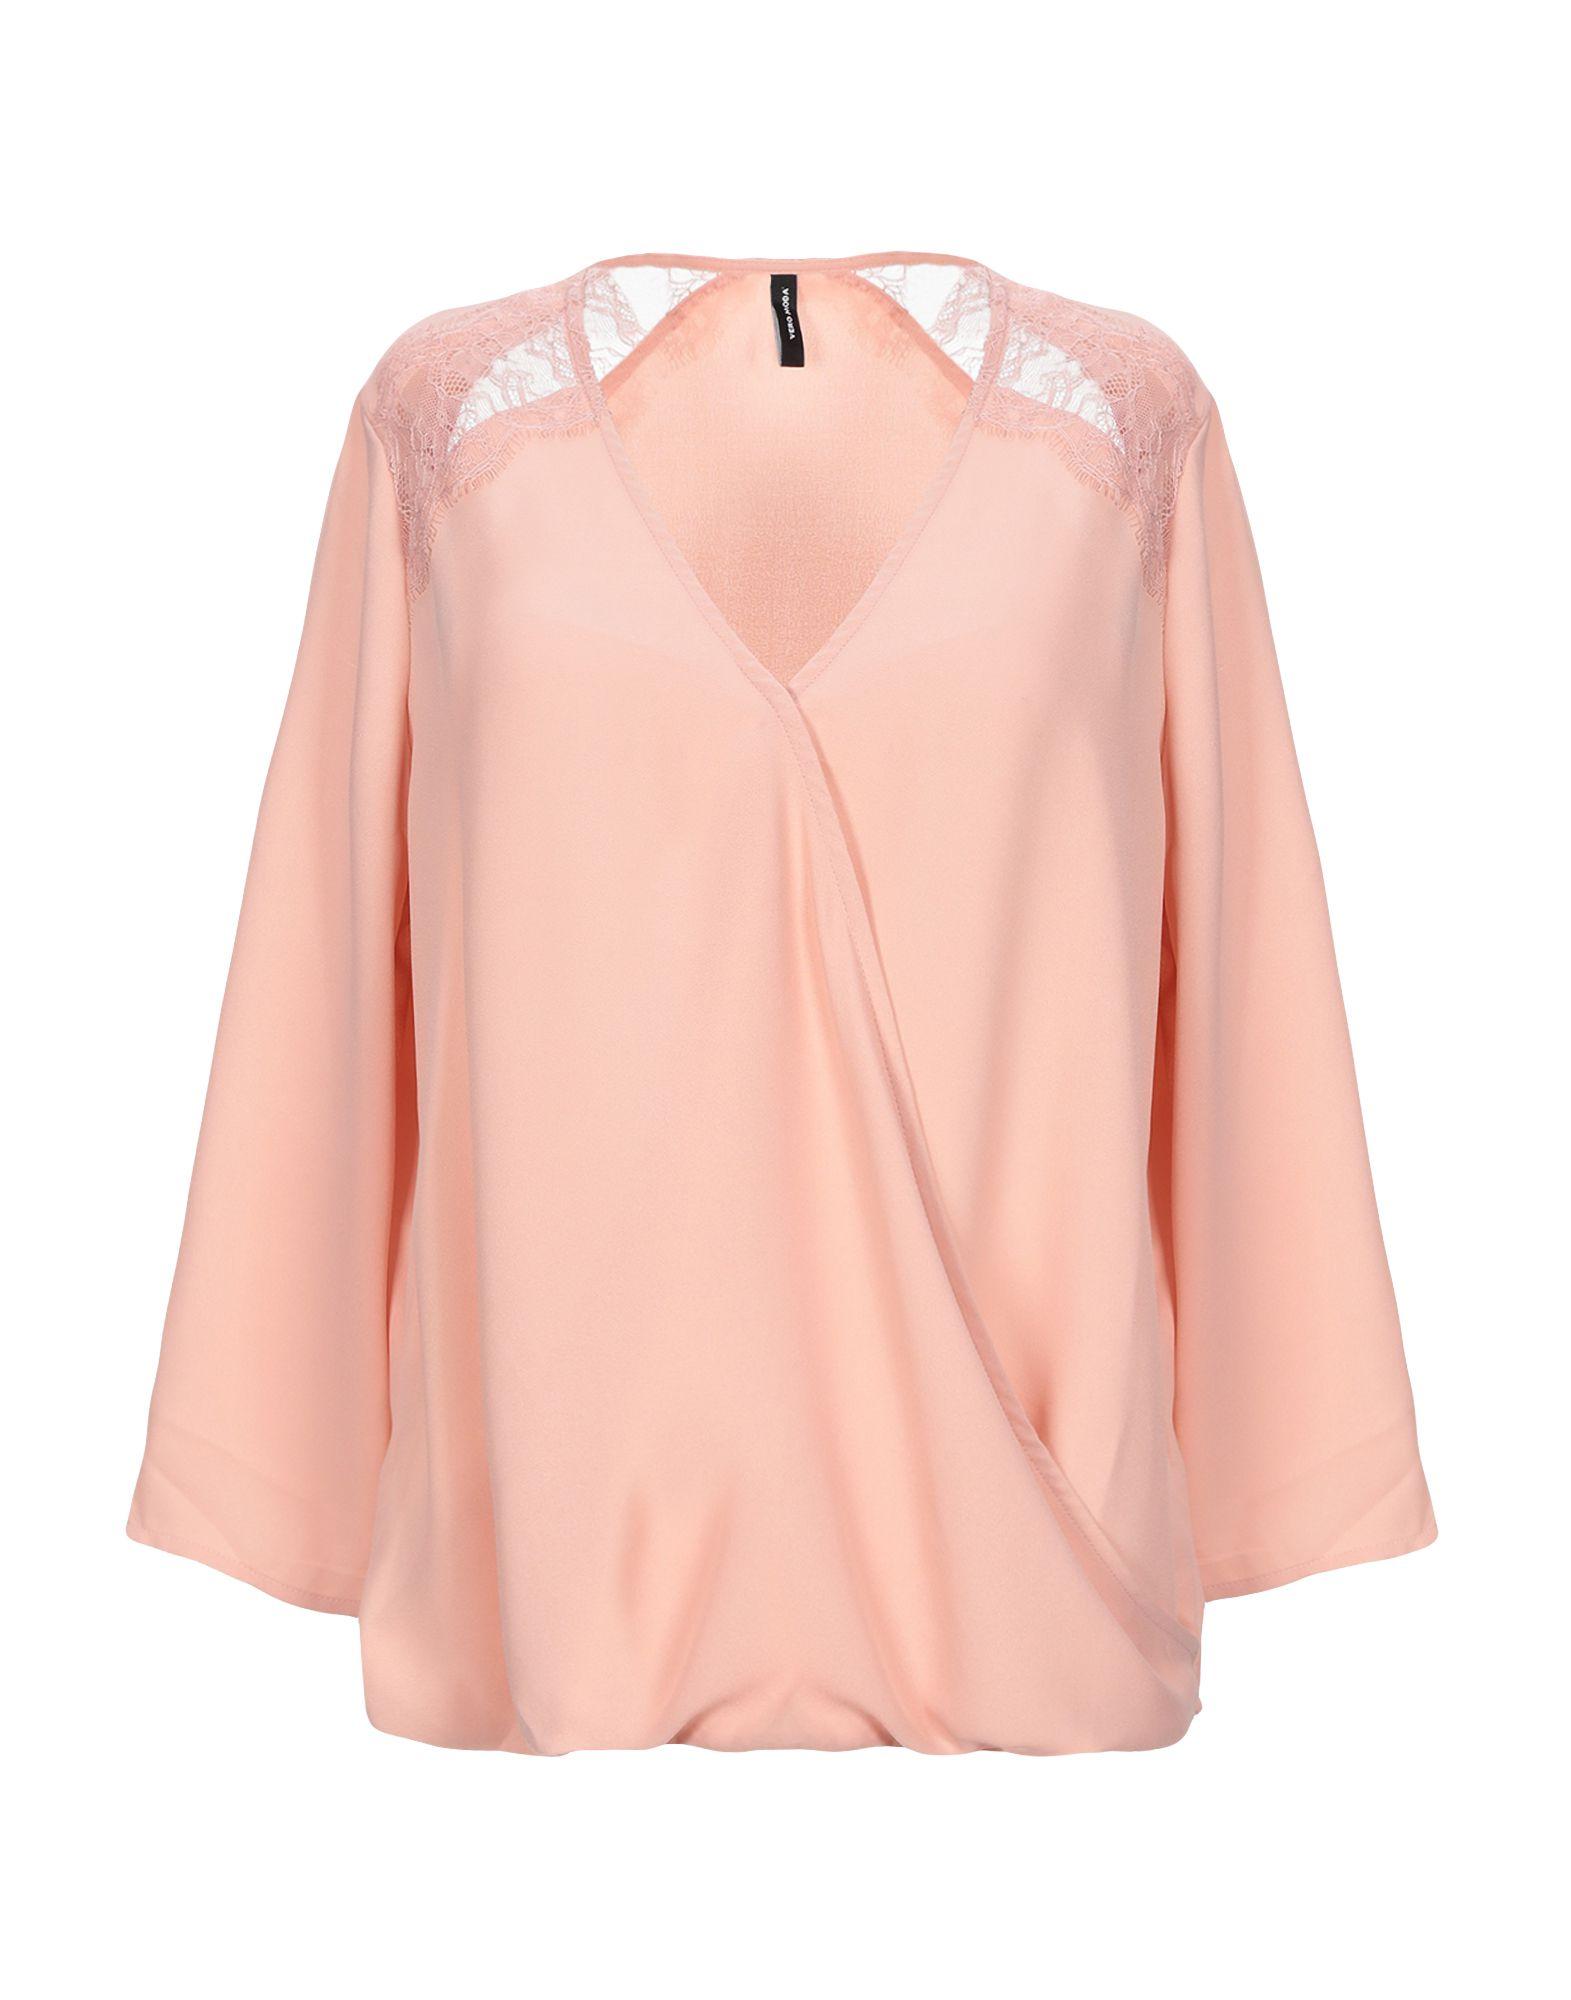 Vero Moda Lace Blouse in Pink - Lyst